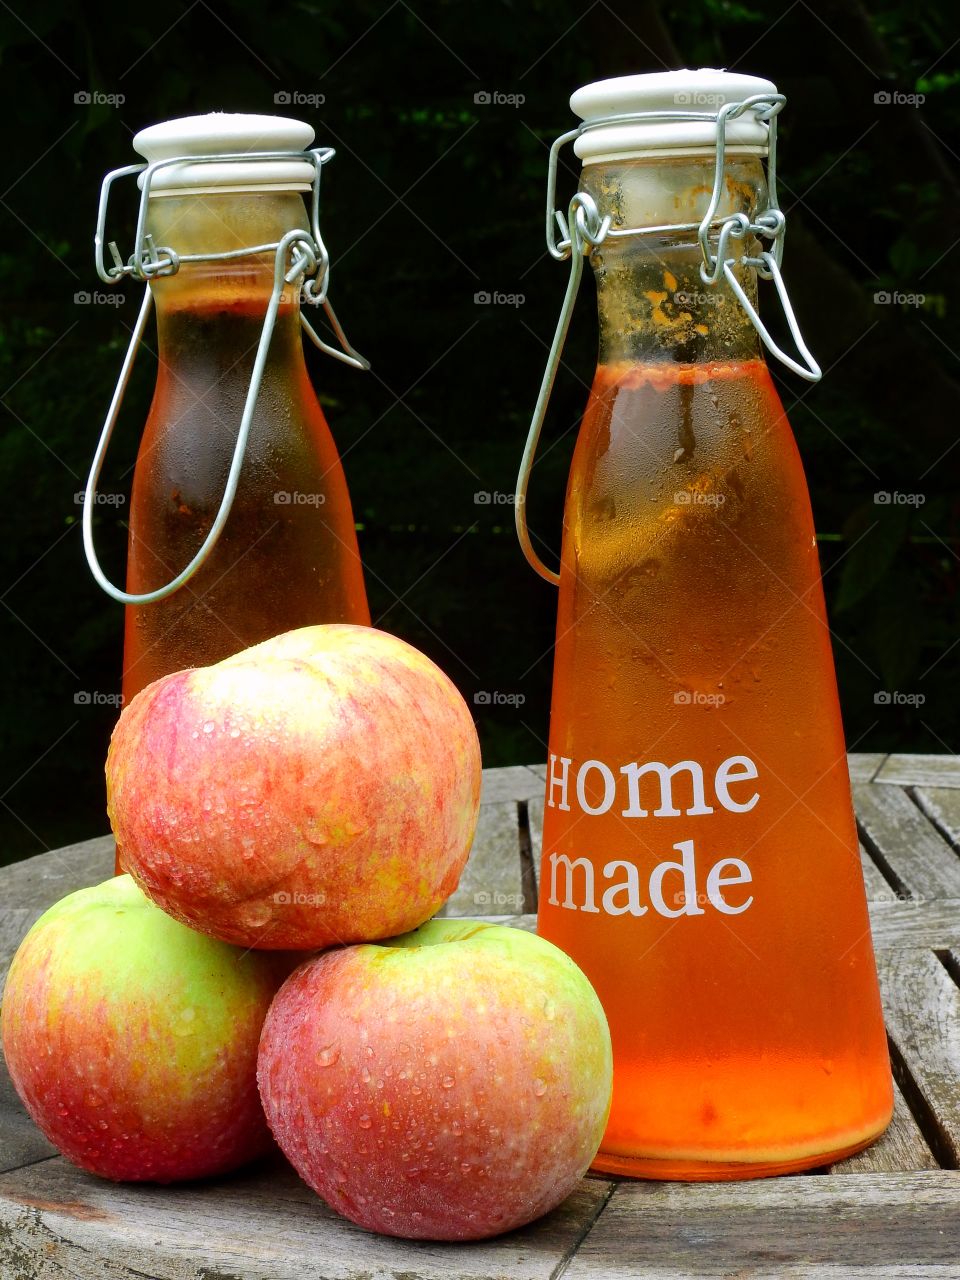 My Homemade Apple juice with Apples from my garden